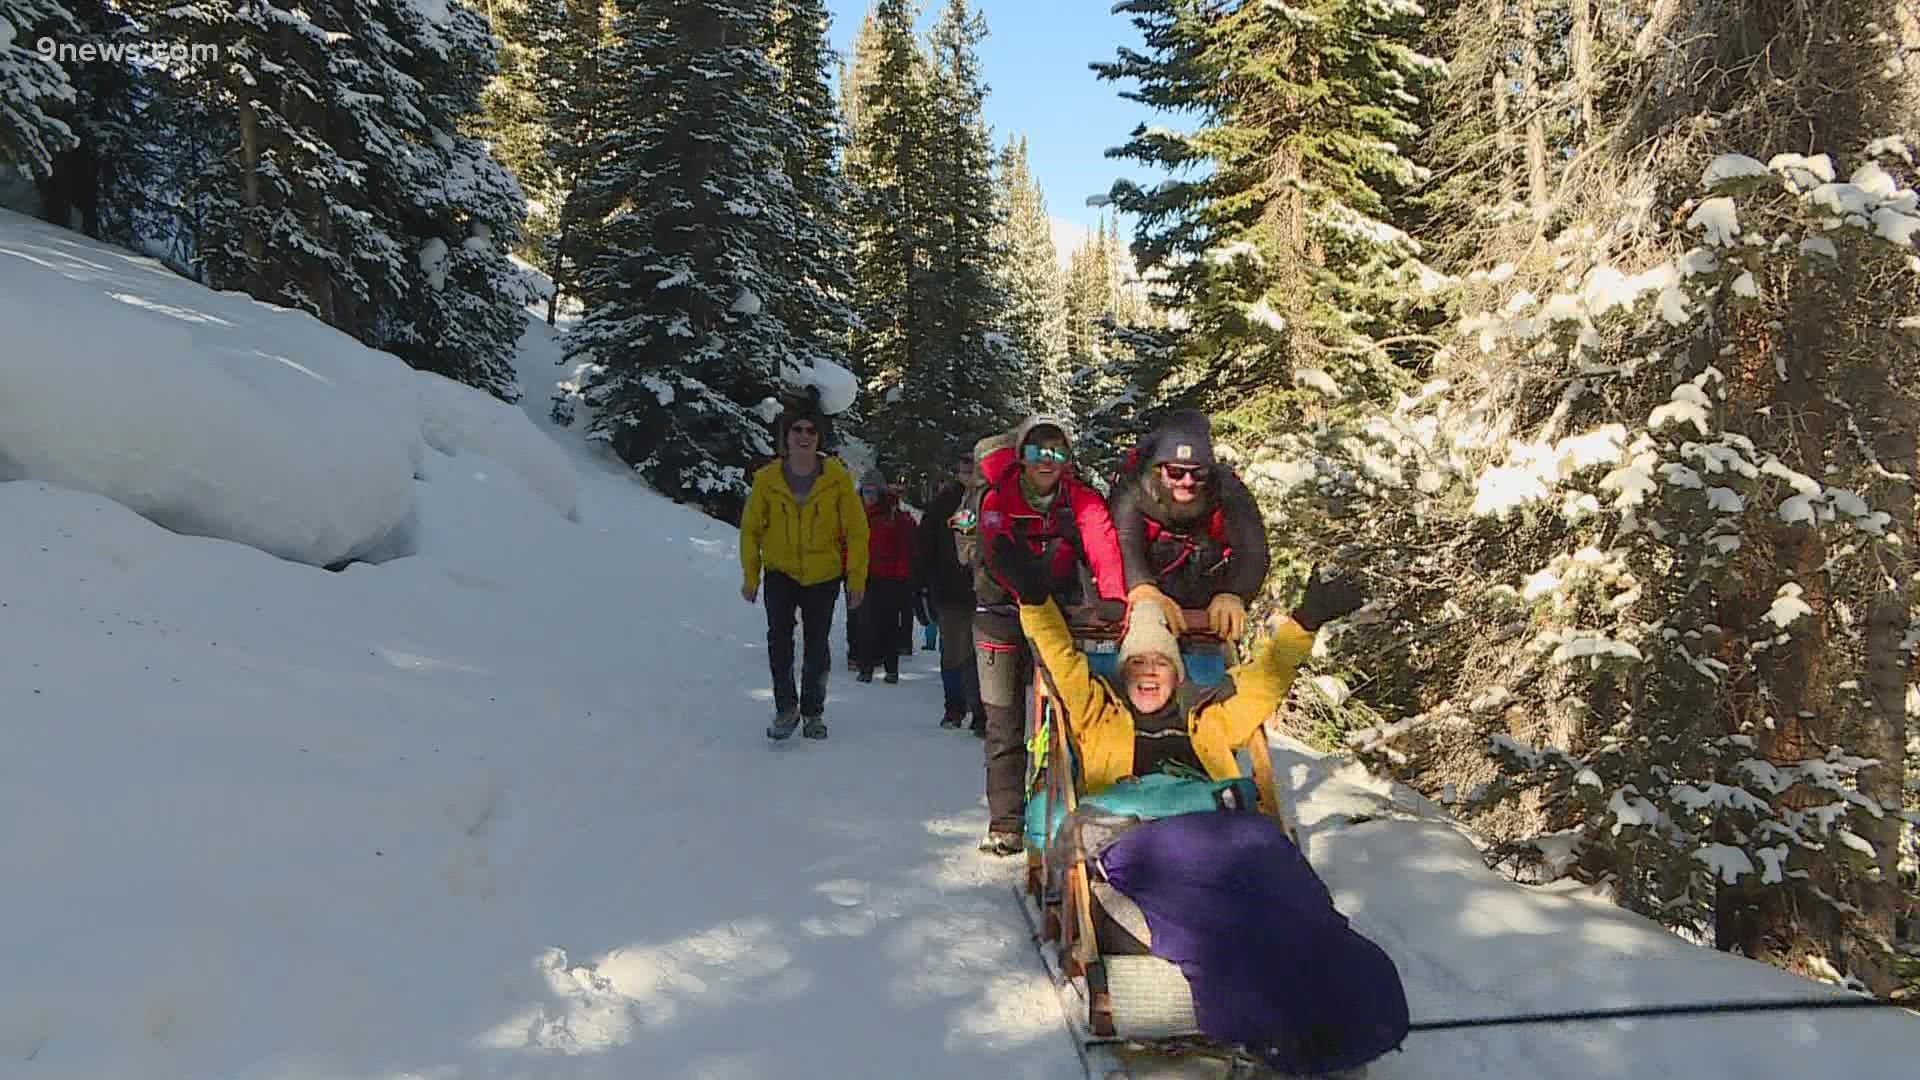 Chris Layne missed seeing beautiful views after a hiking accident left her a paraplegic. A Colorado nonprofit helped her get back on the trail.